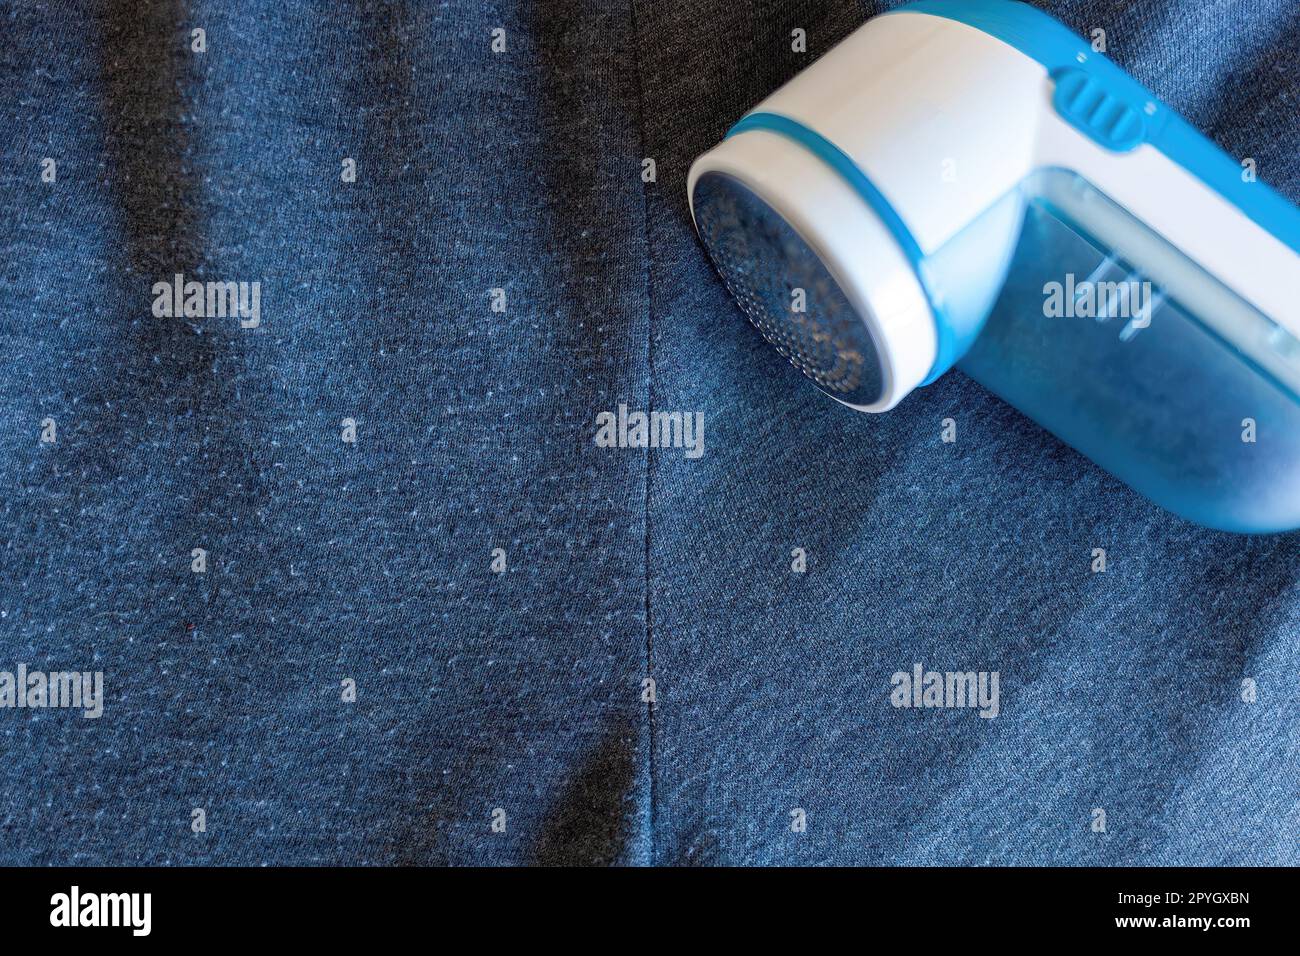 Modern fabric shaver on grey cloth.This device to remove lint from clothes. Stock Photo